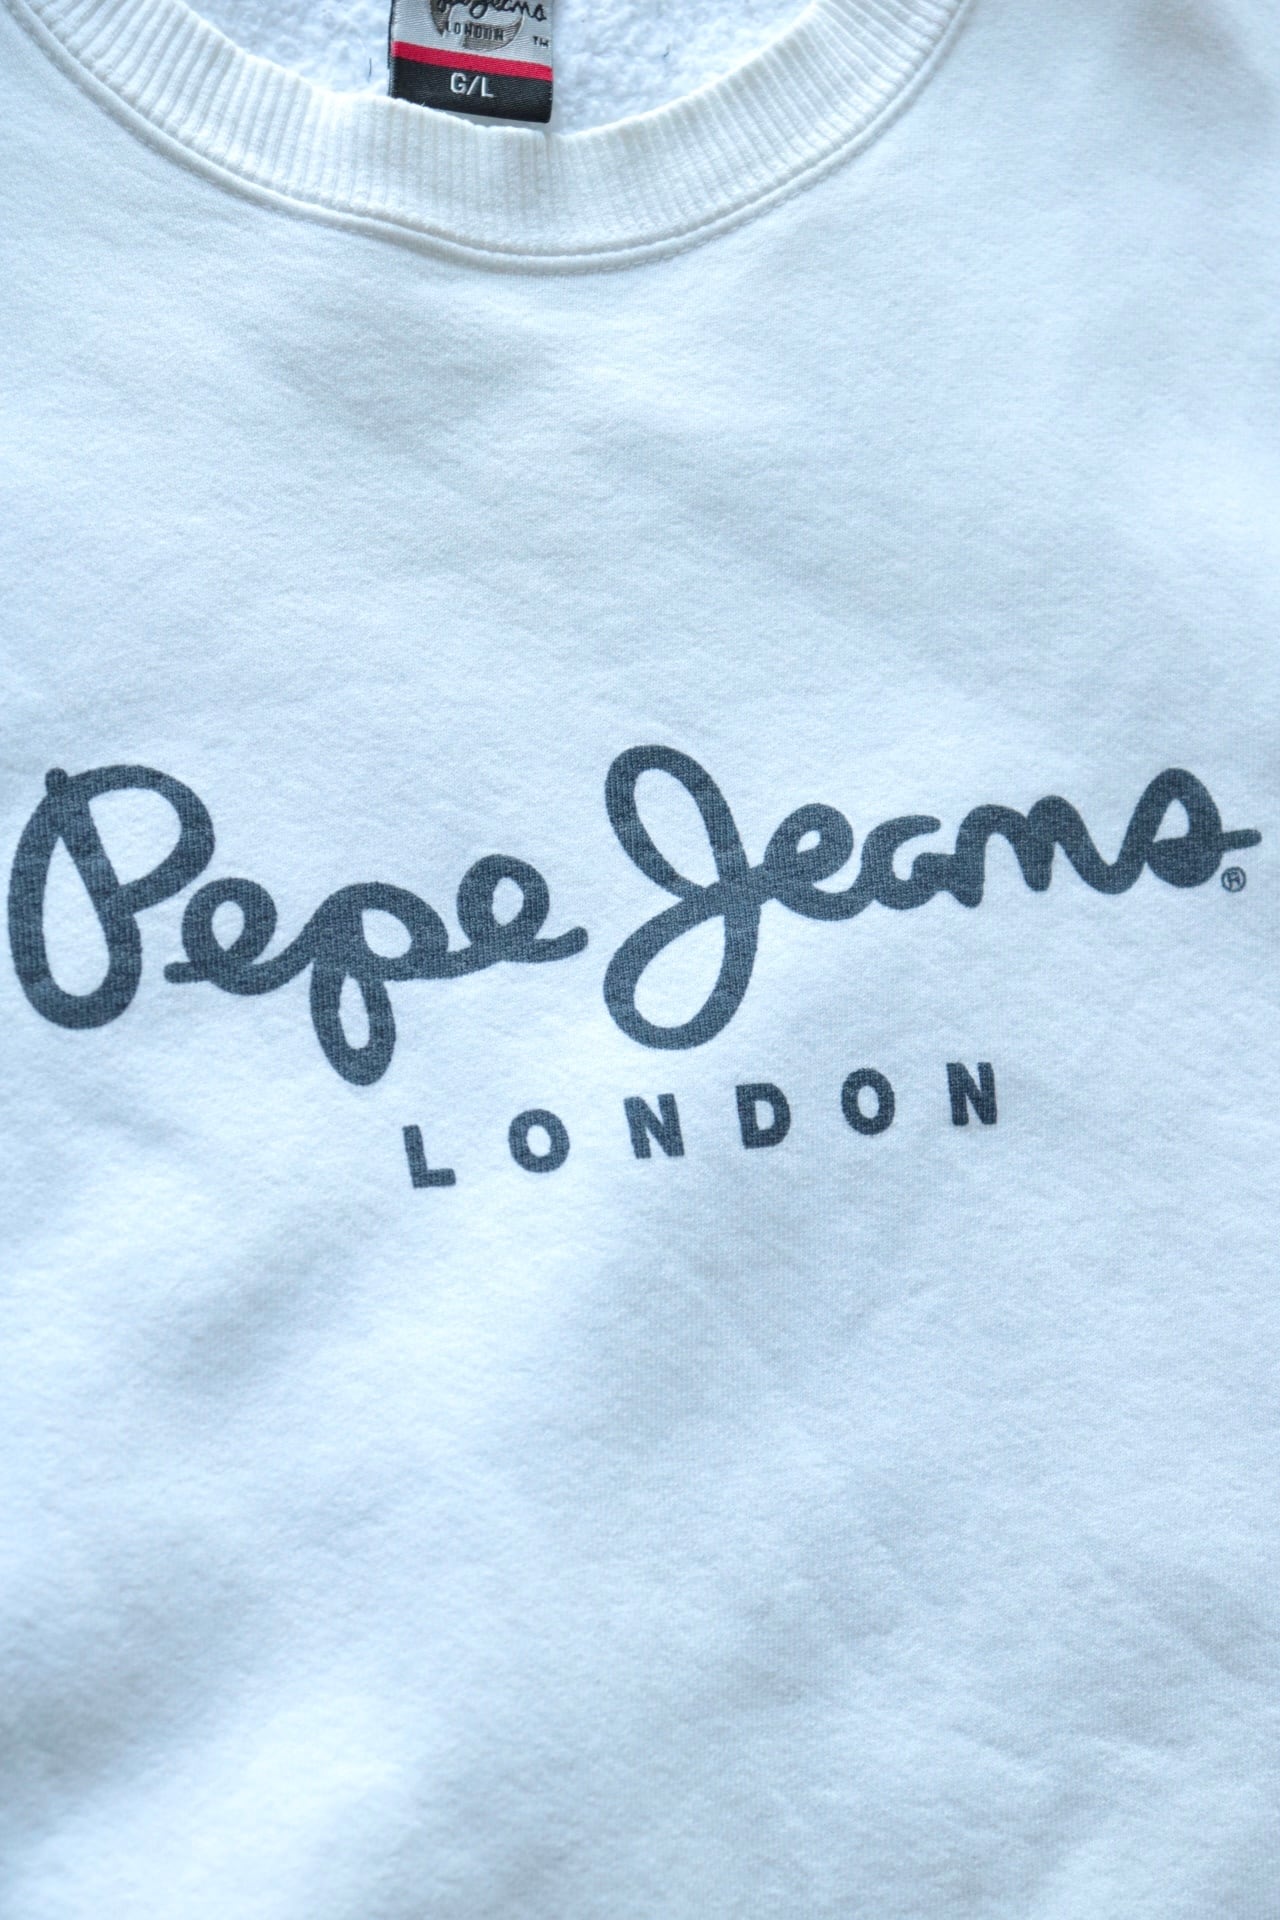 Vintage Pepe Jeans logo Sweater | Cary